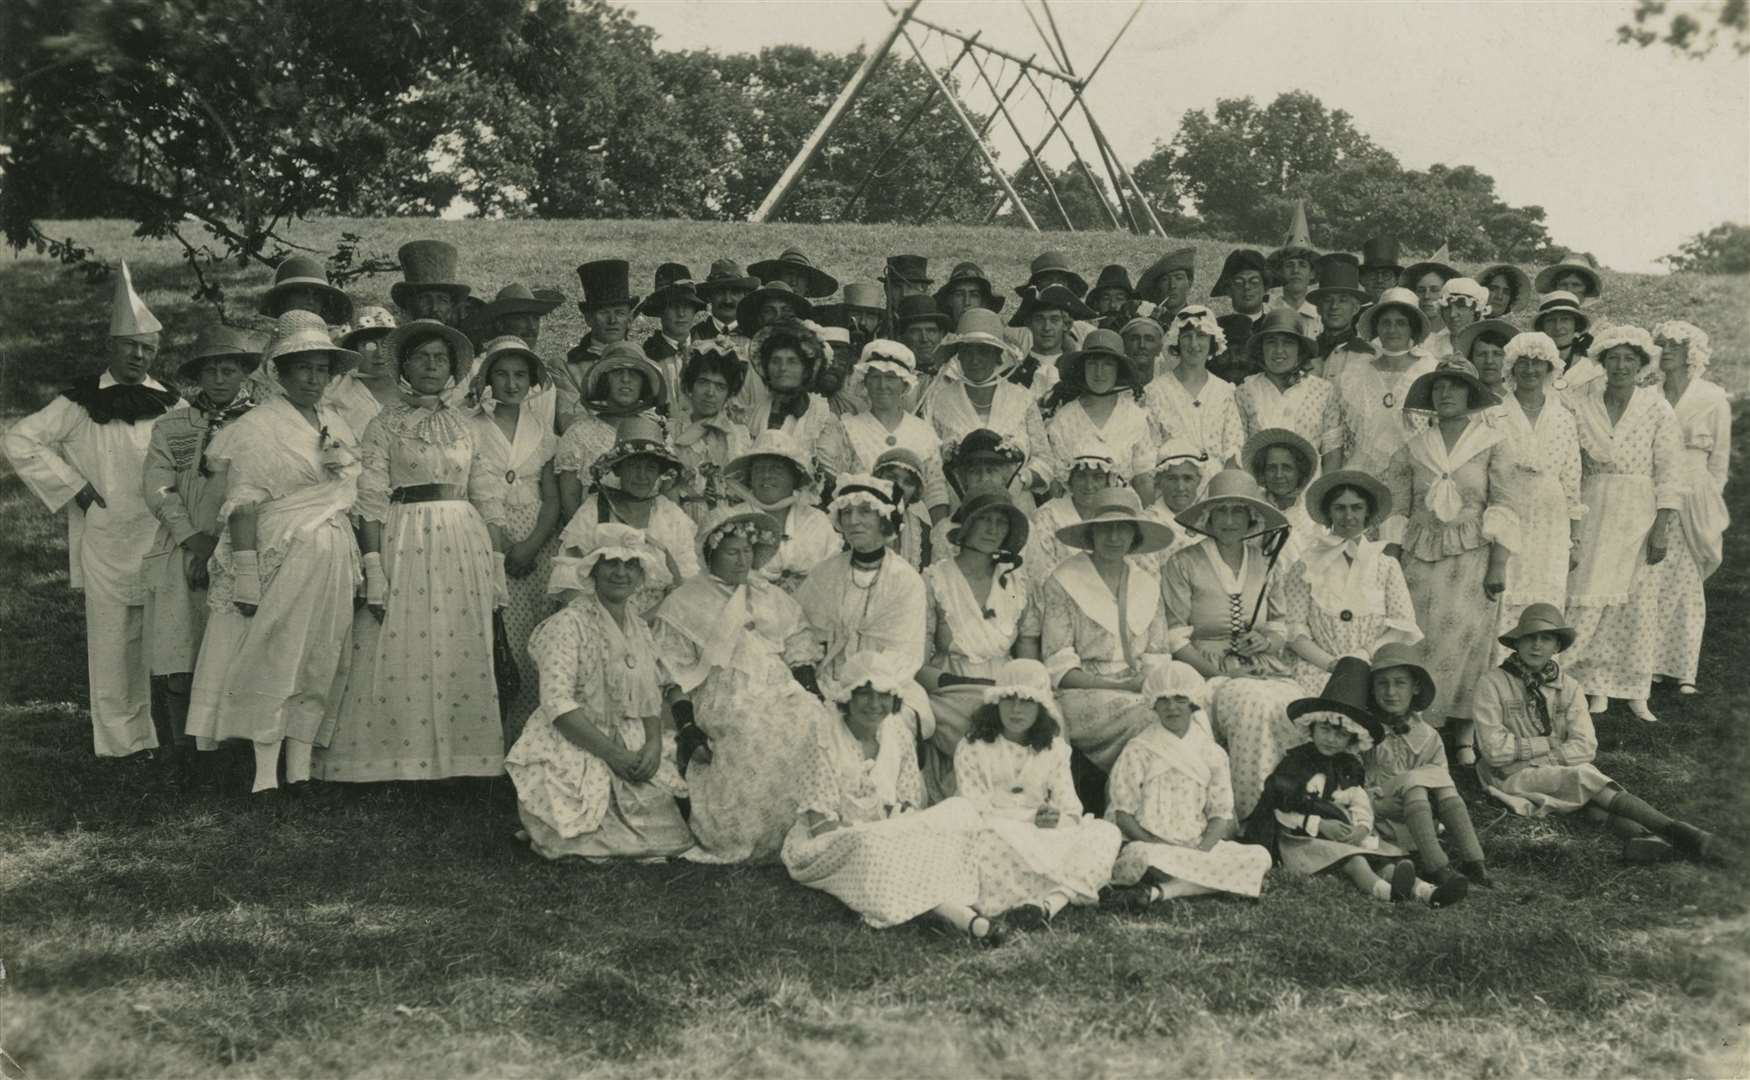 The village's Old English Fair from 1924